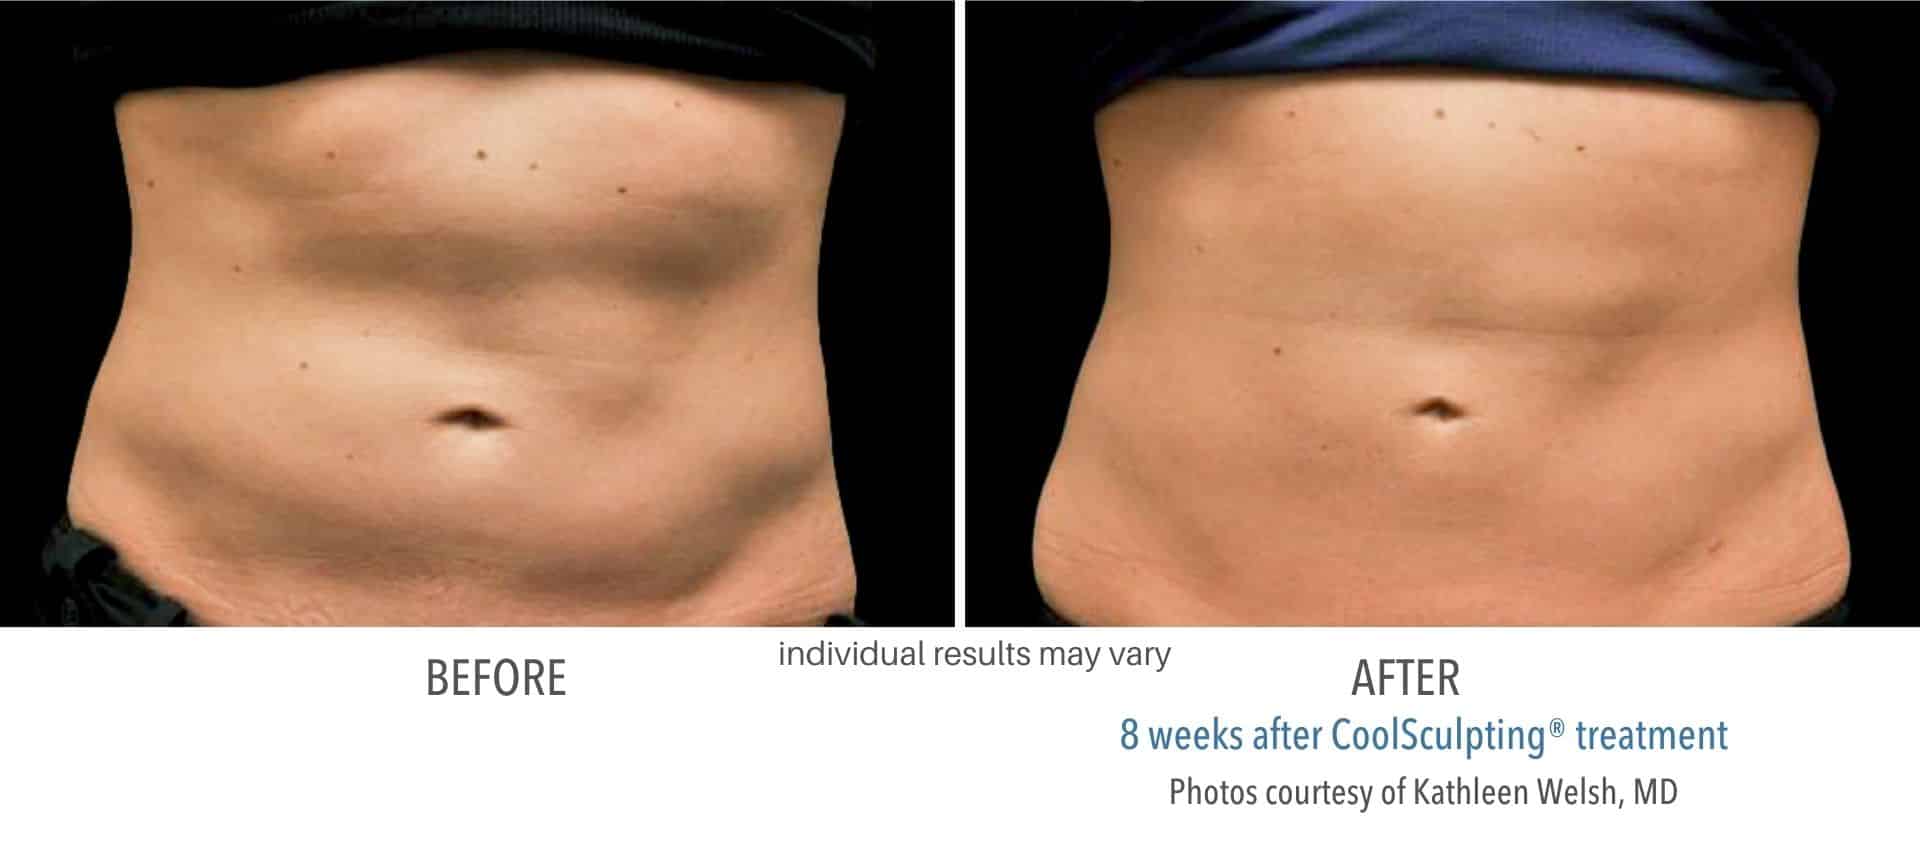 Coolsculpting abdomen before and after results.